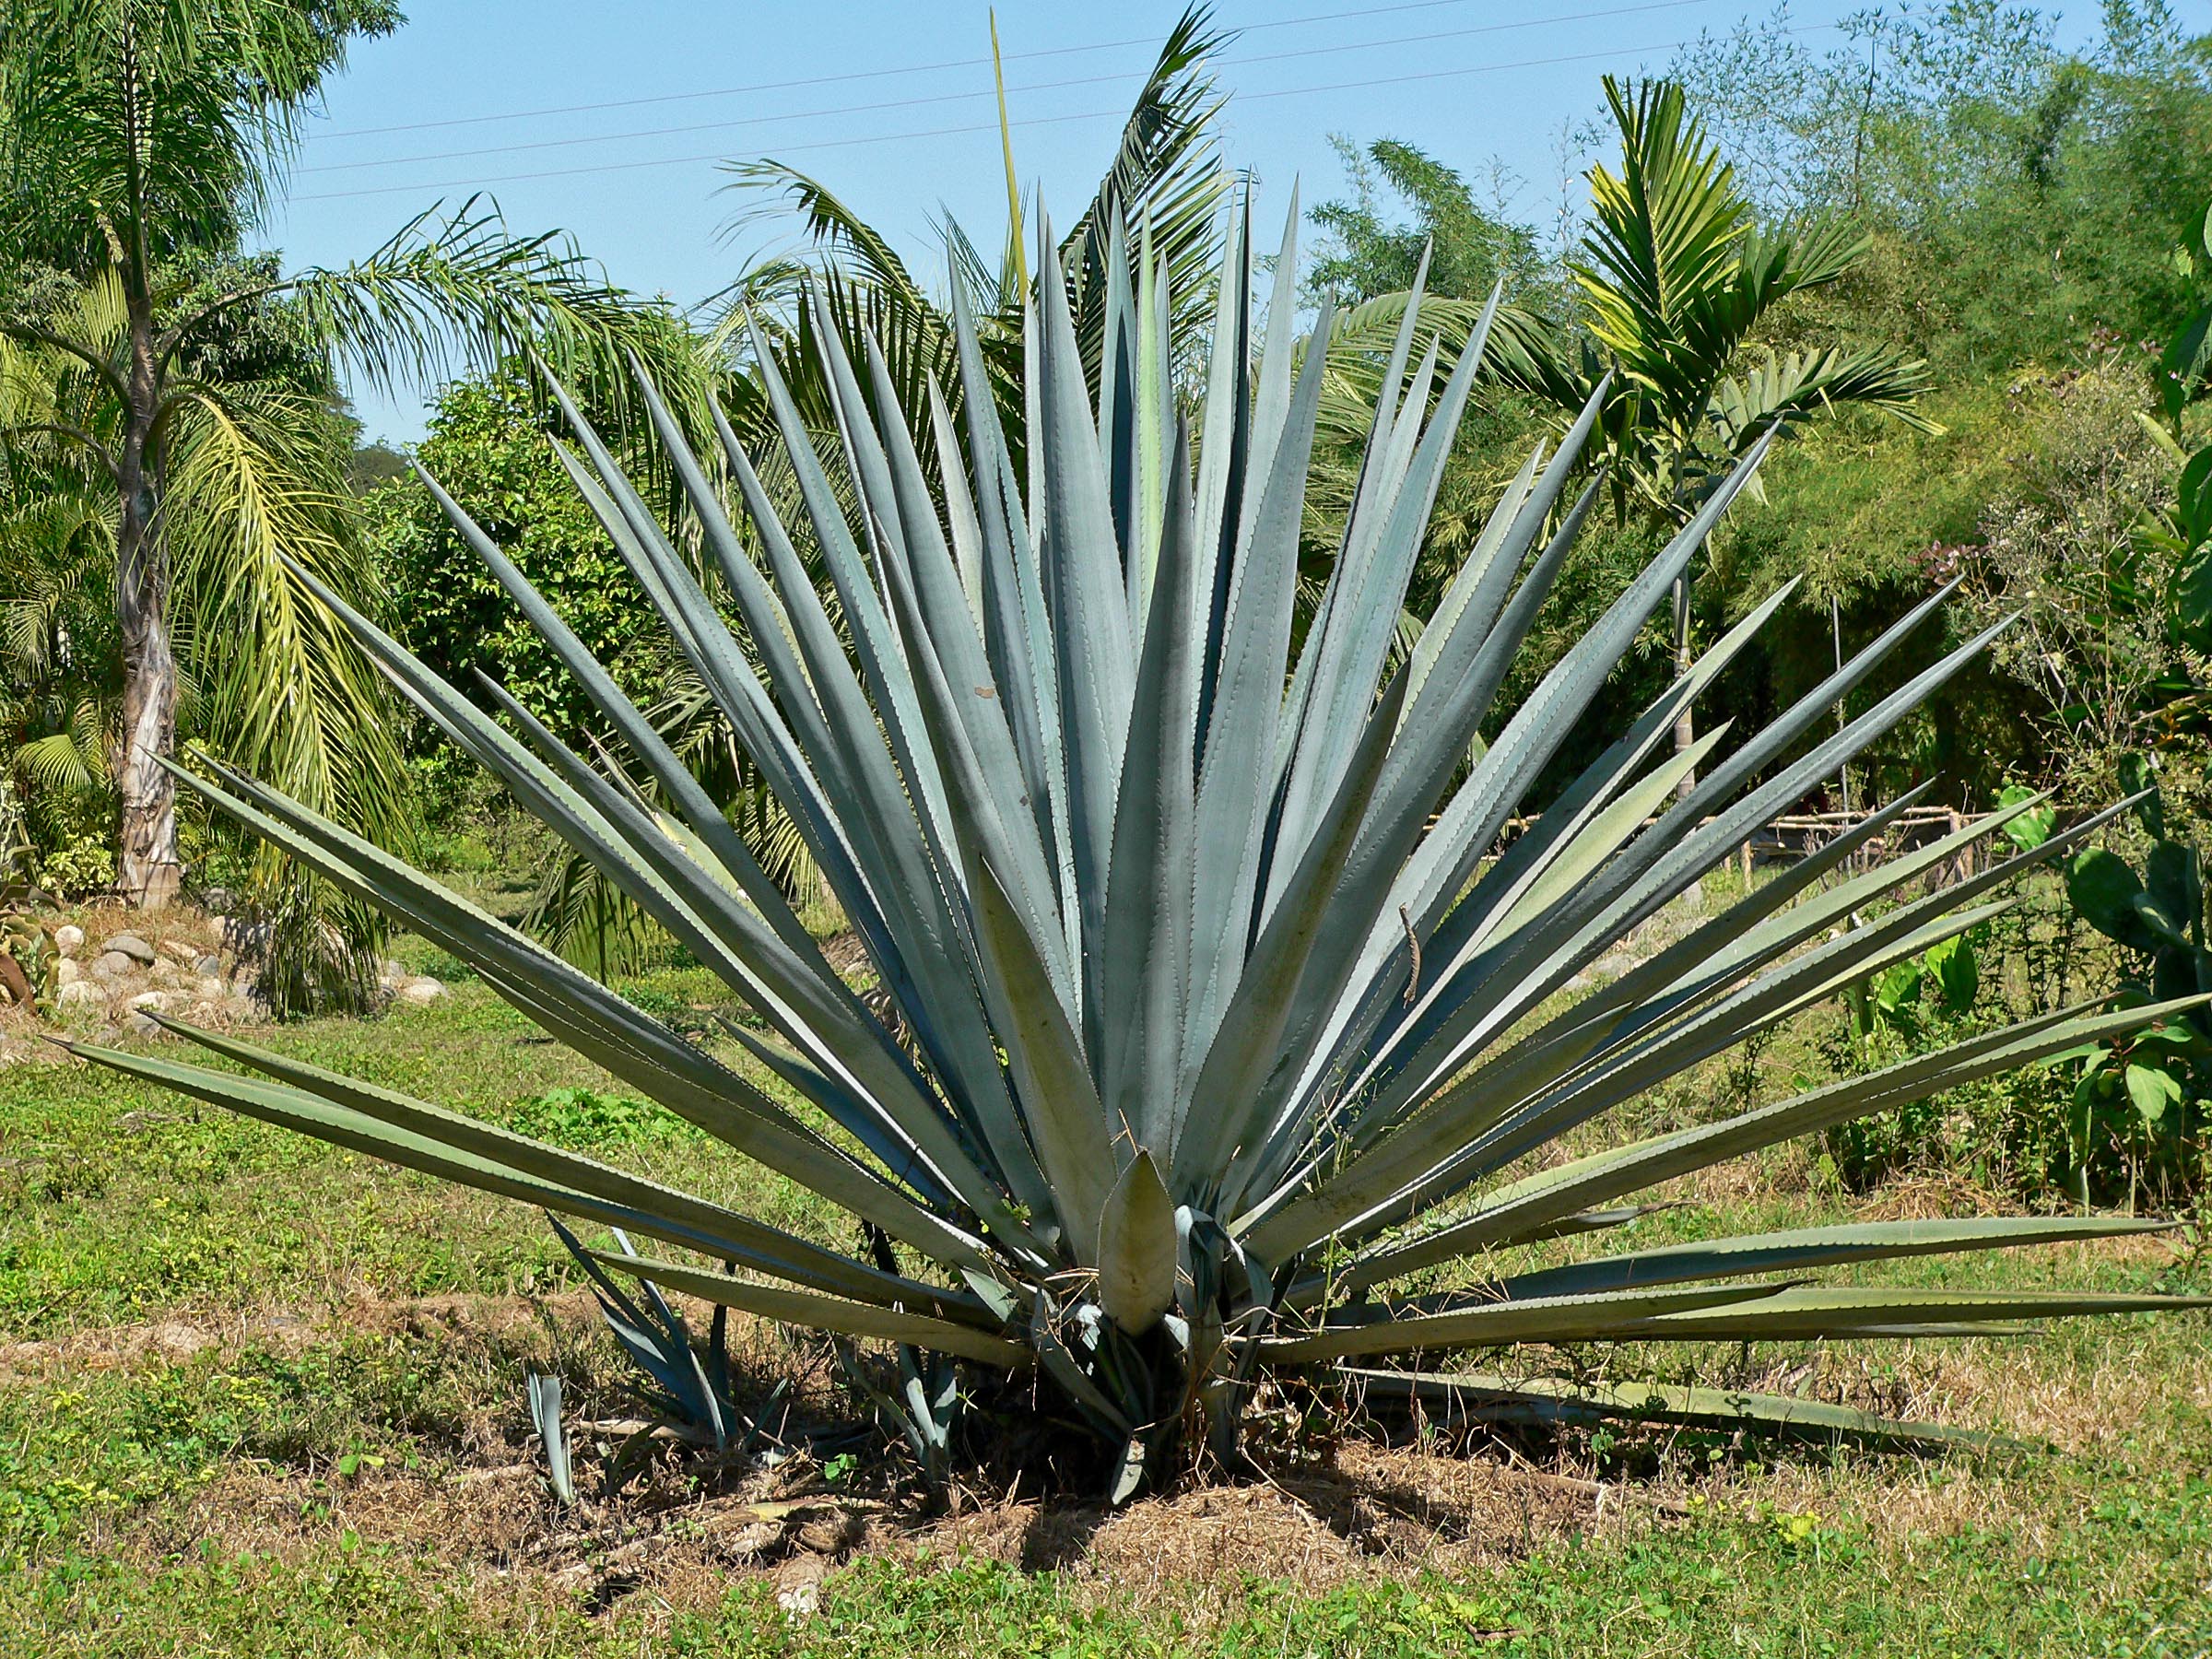 Blue Agave Market Growing Technology Trends, Demand and Business Opportunities by 2026